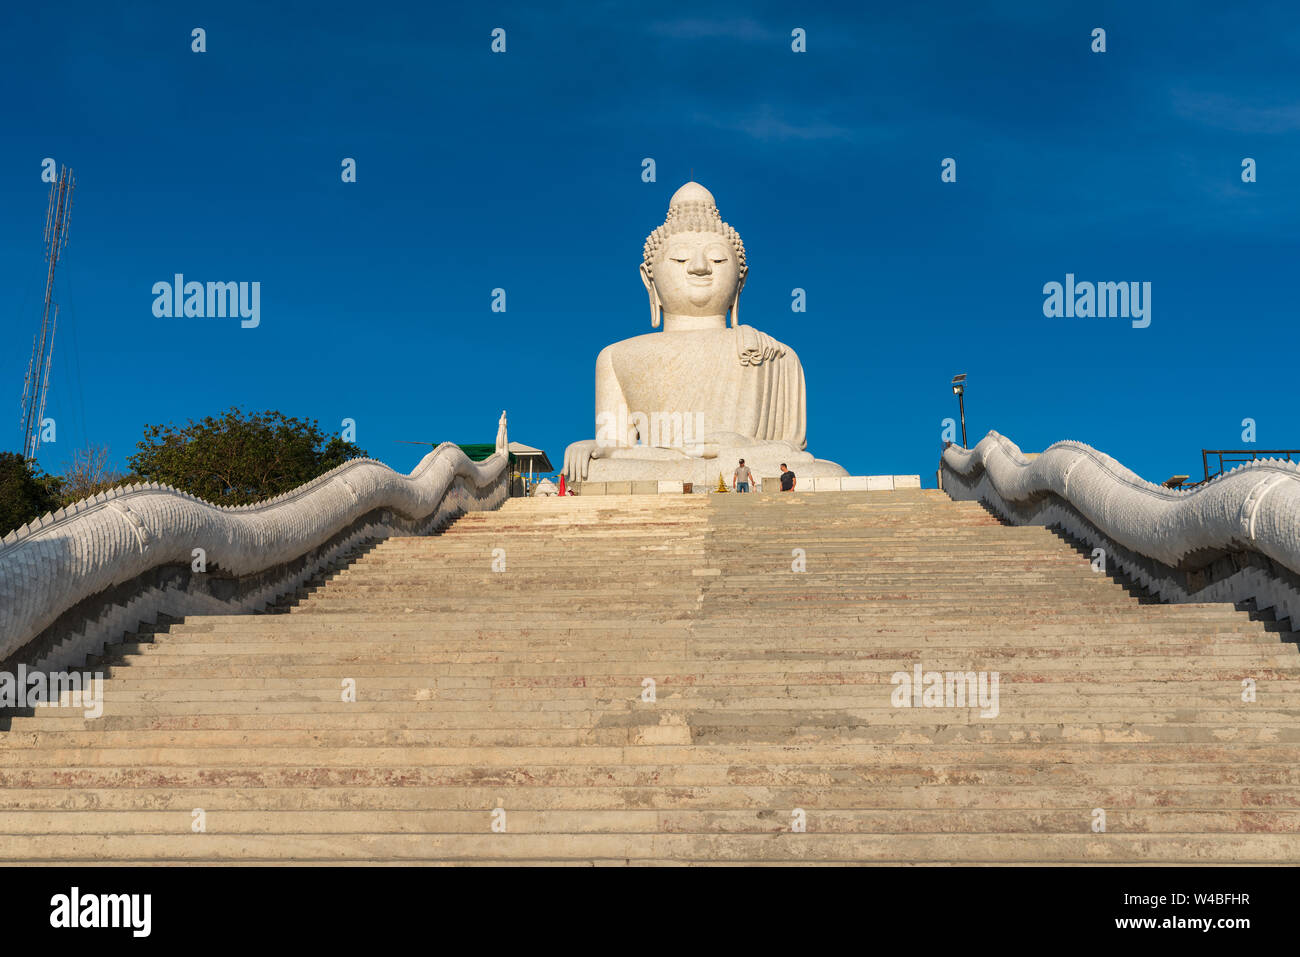 Phuket Big Buddha or The Great Buddha of Phuket - one of the most recognizable tourist attractions on the tropical island Phuket. Thailand Stock Photo